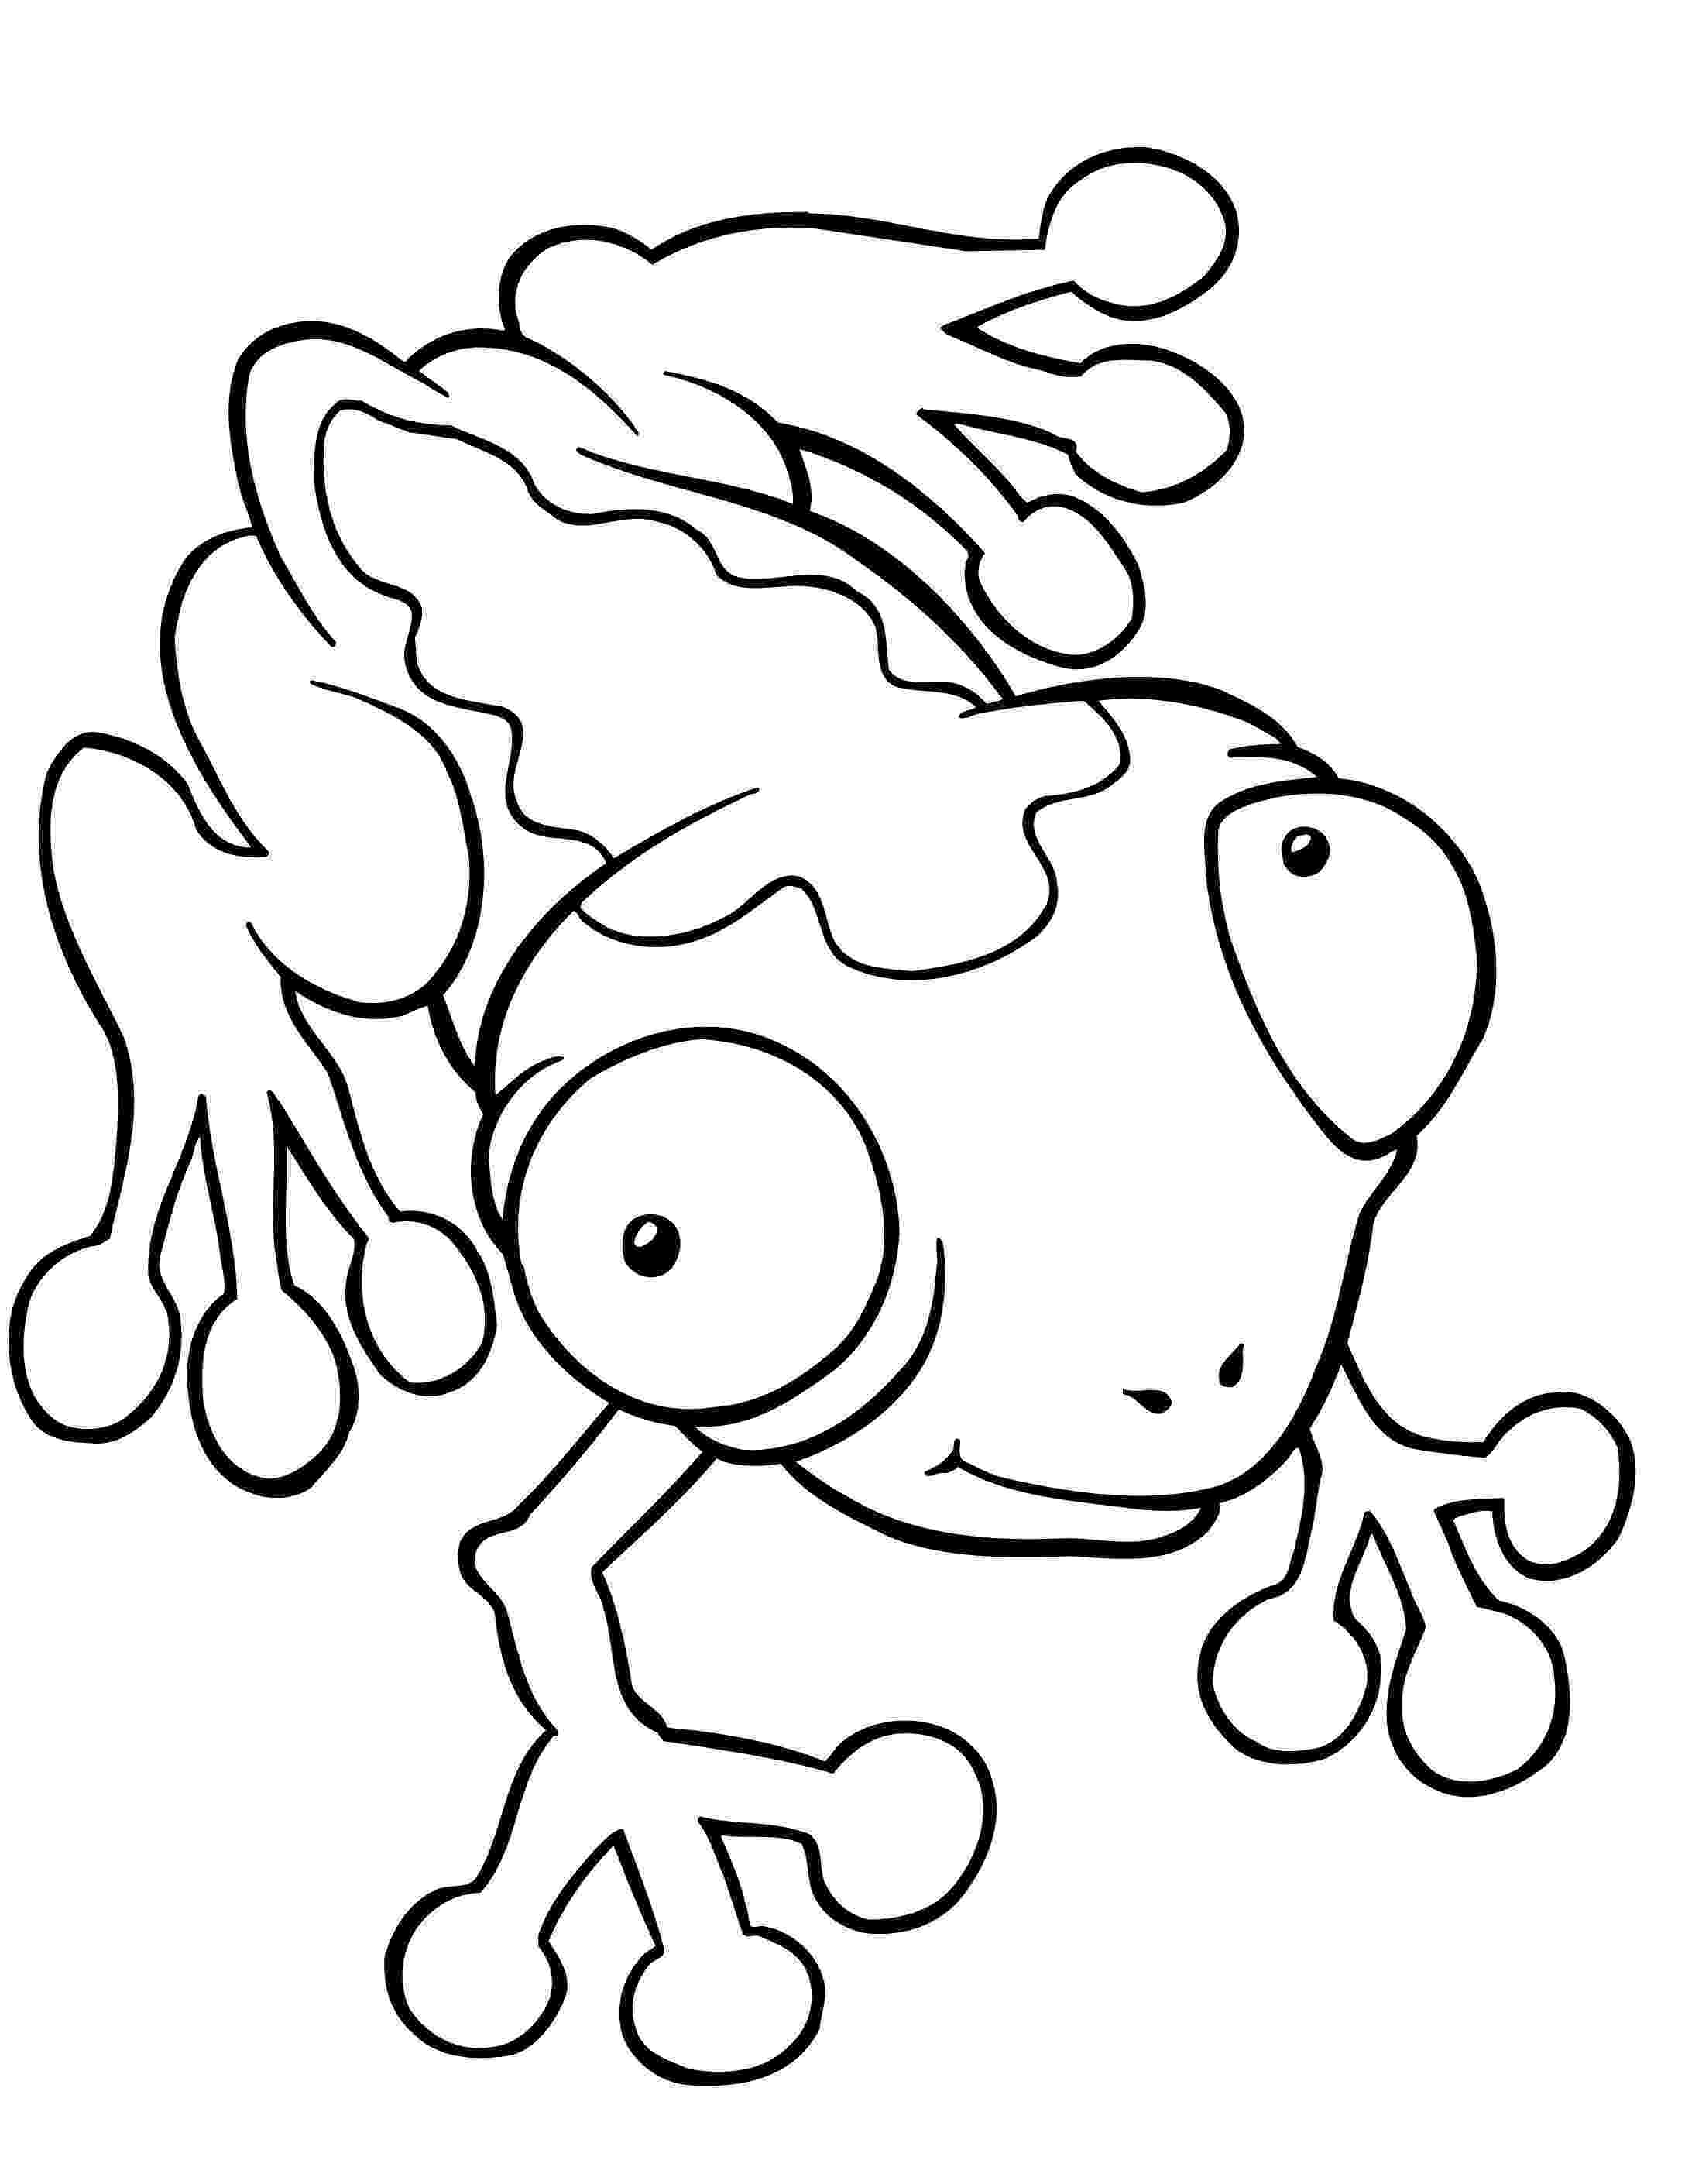 frogs coloring pages free printable frog coloring pages for kids pages frogs coloring 